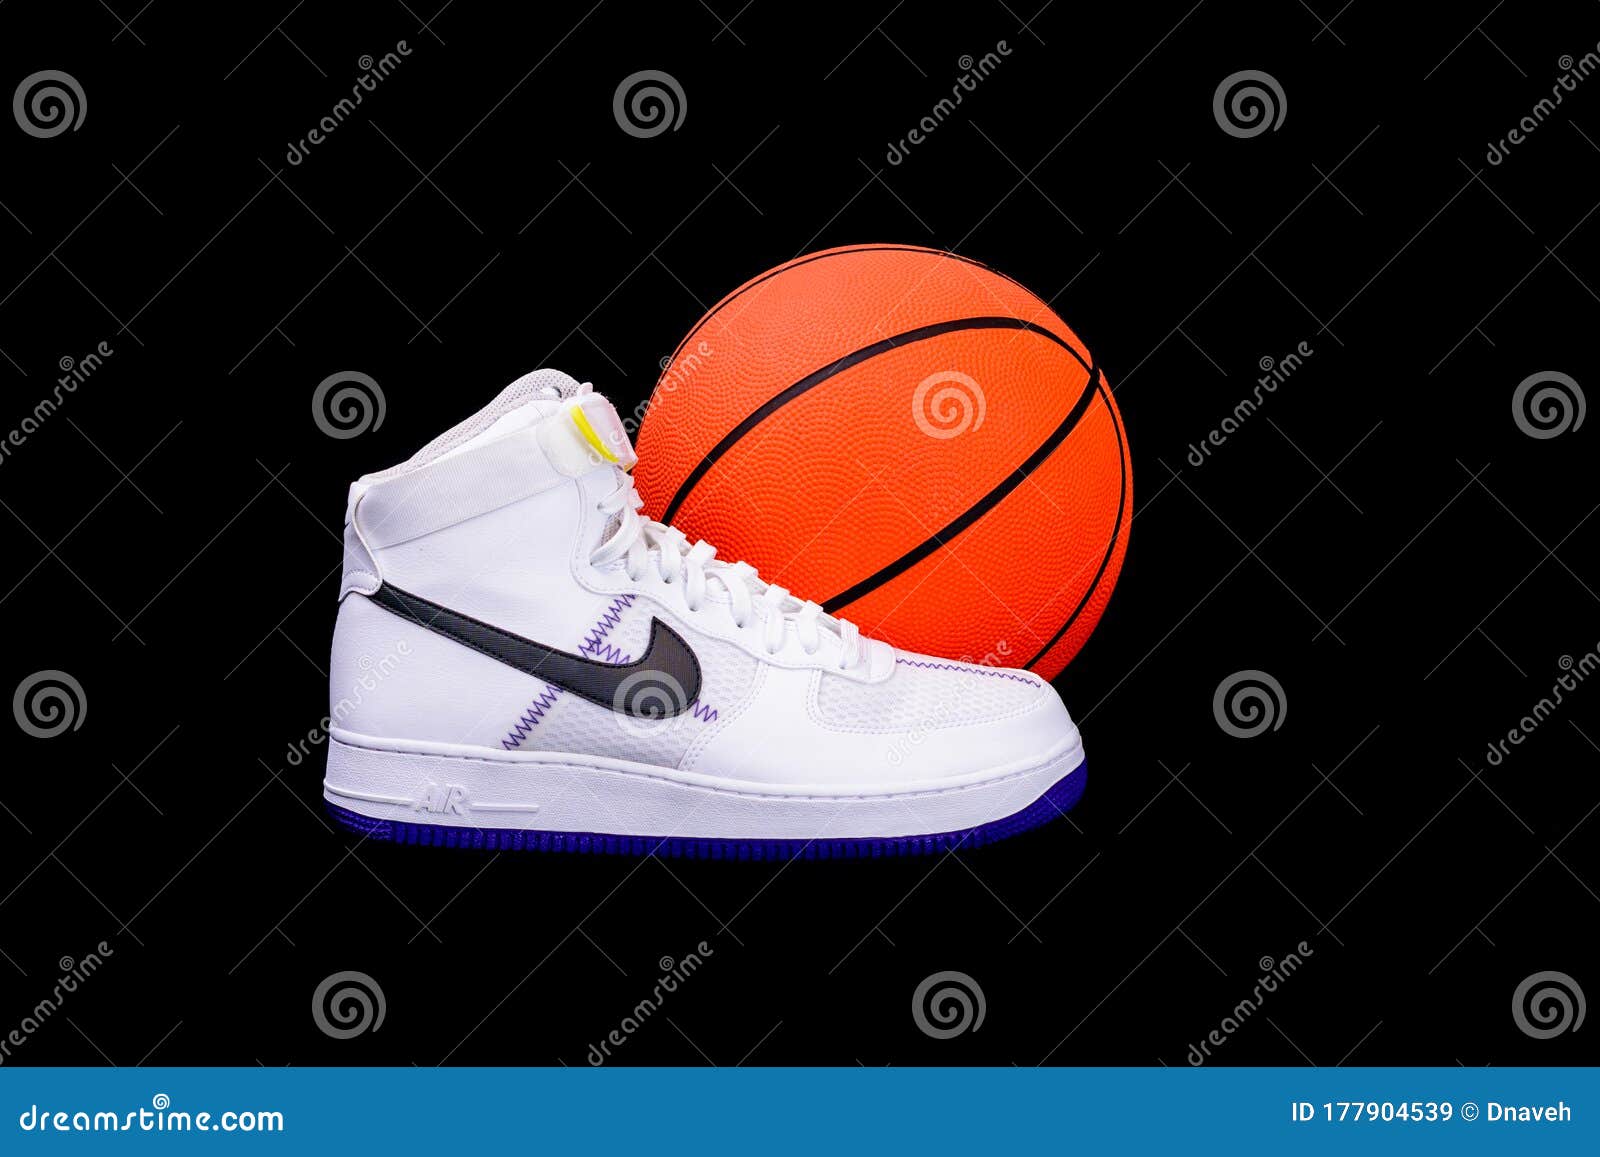 air force 1 basketball shoes